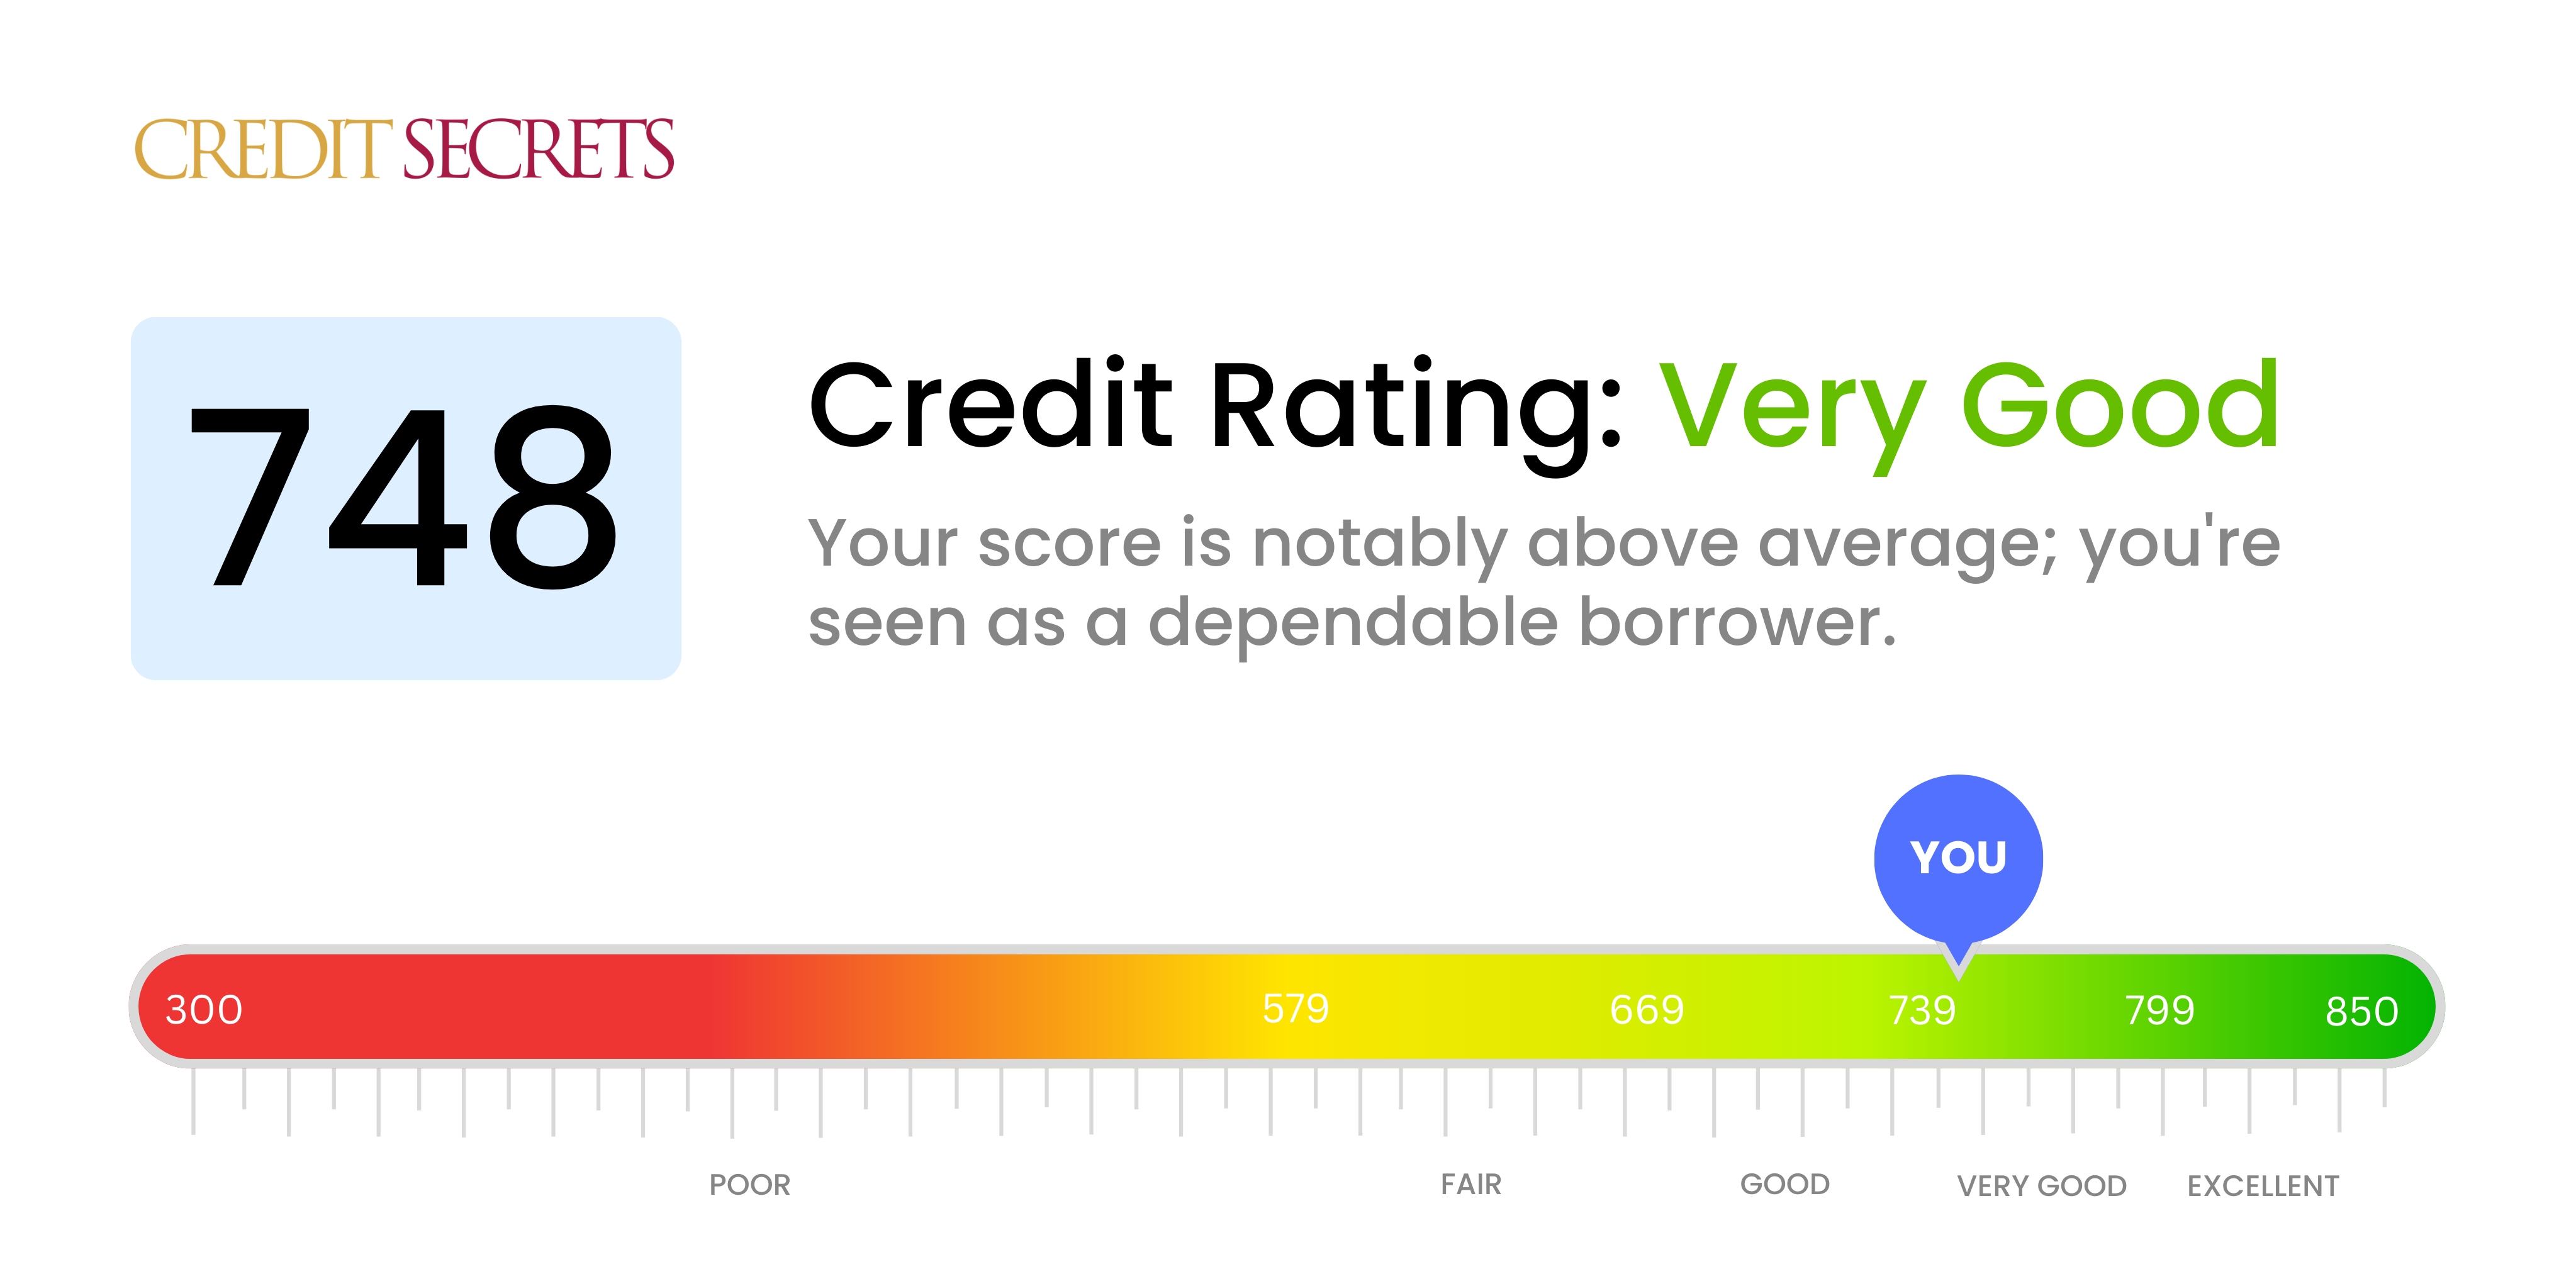 Is 748 a good credit score?